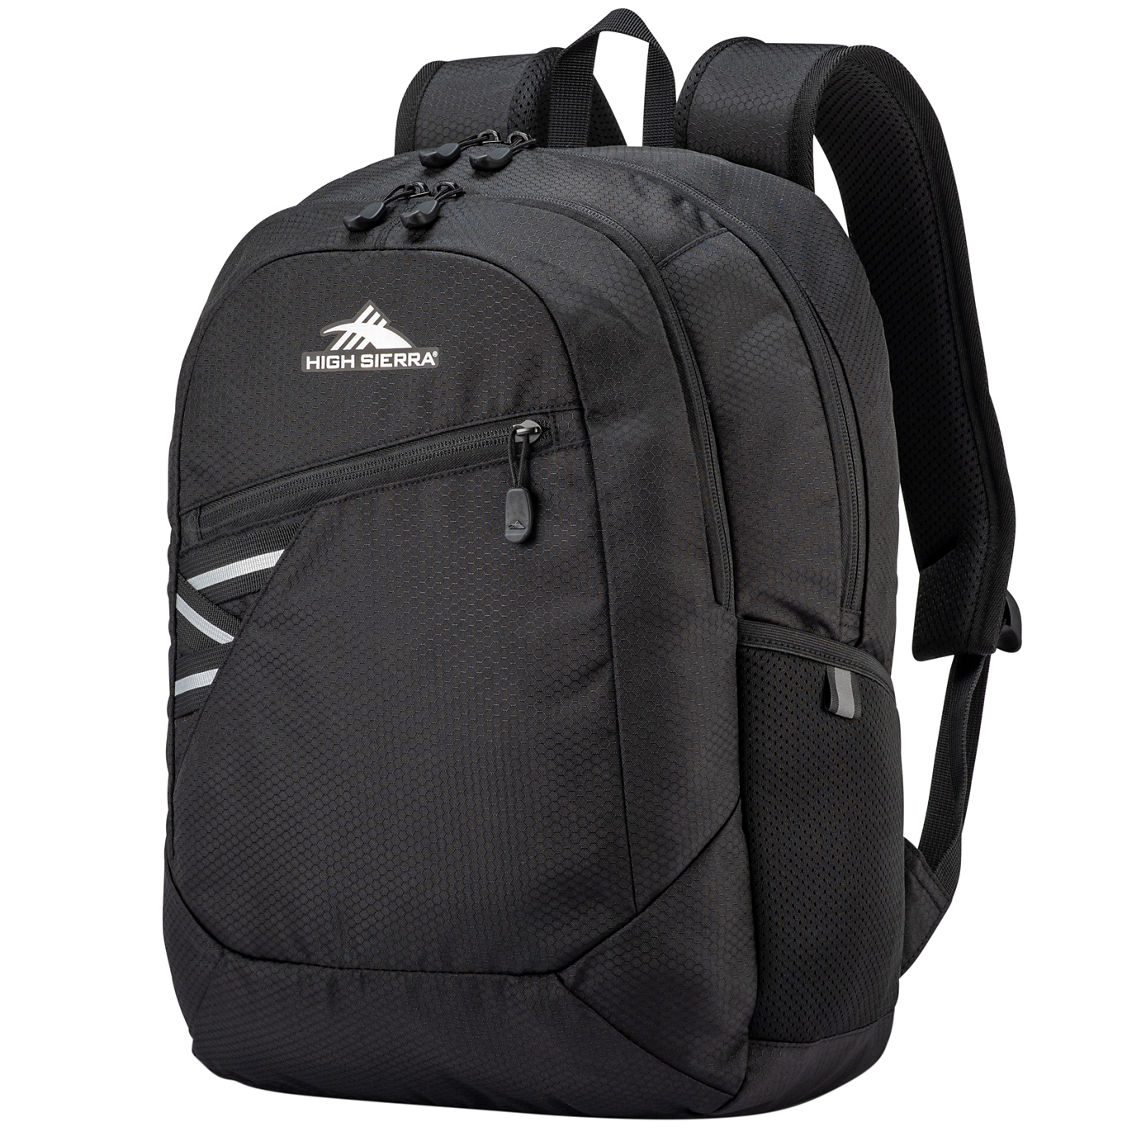 High Sierra Outburst 2.0 Backpack | Backpacks | Clothing & Accessories ...